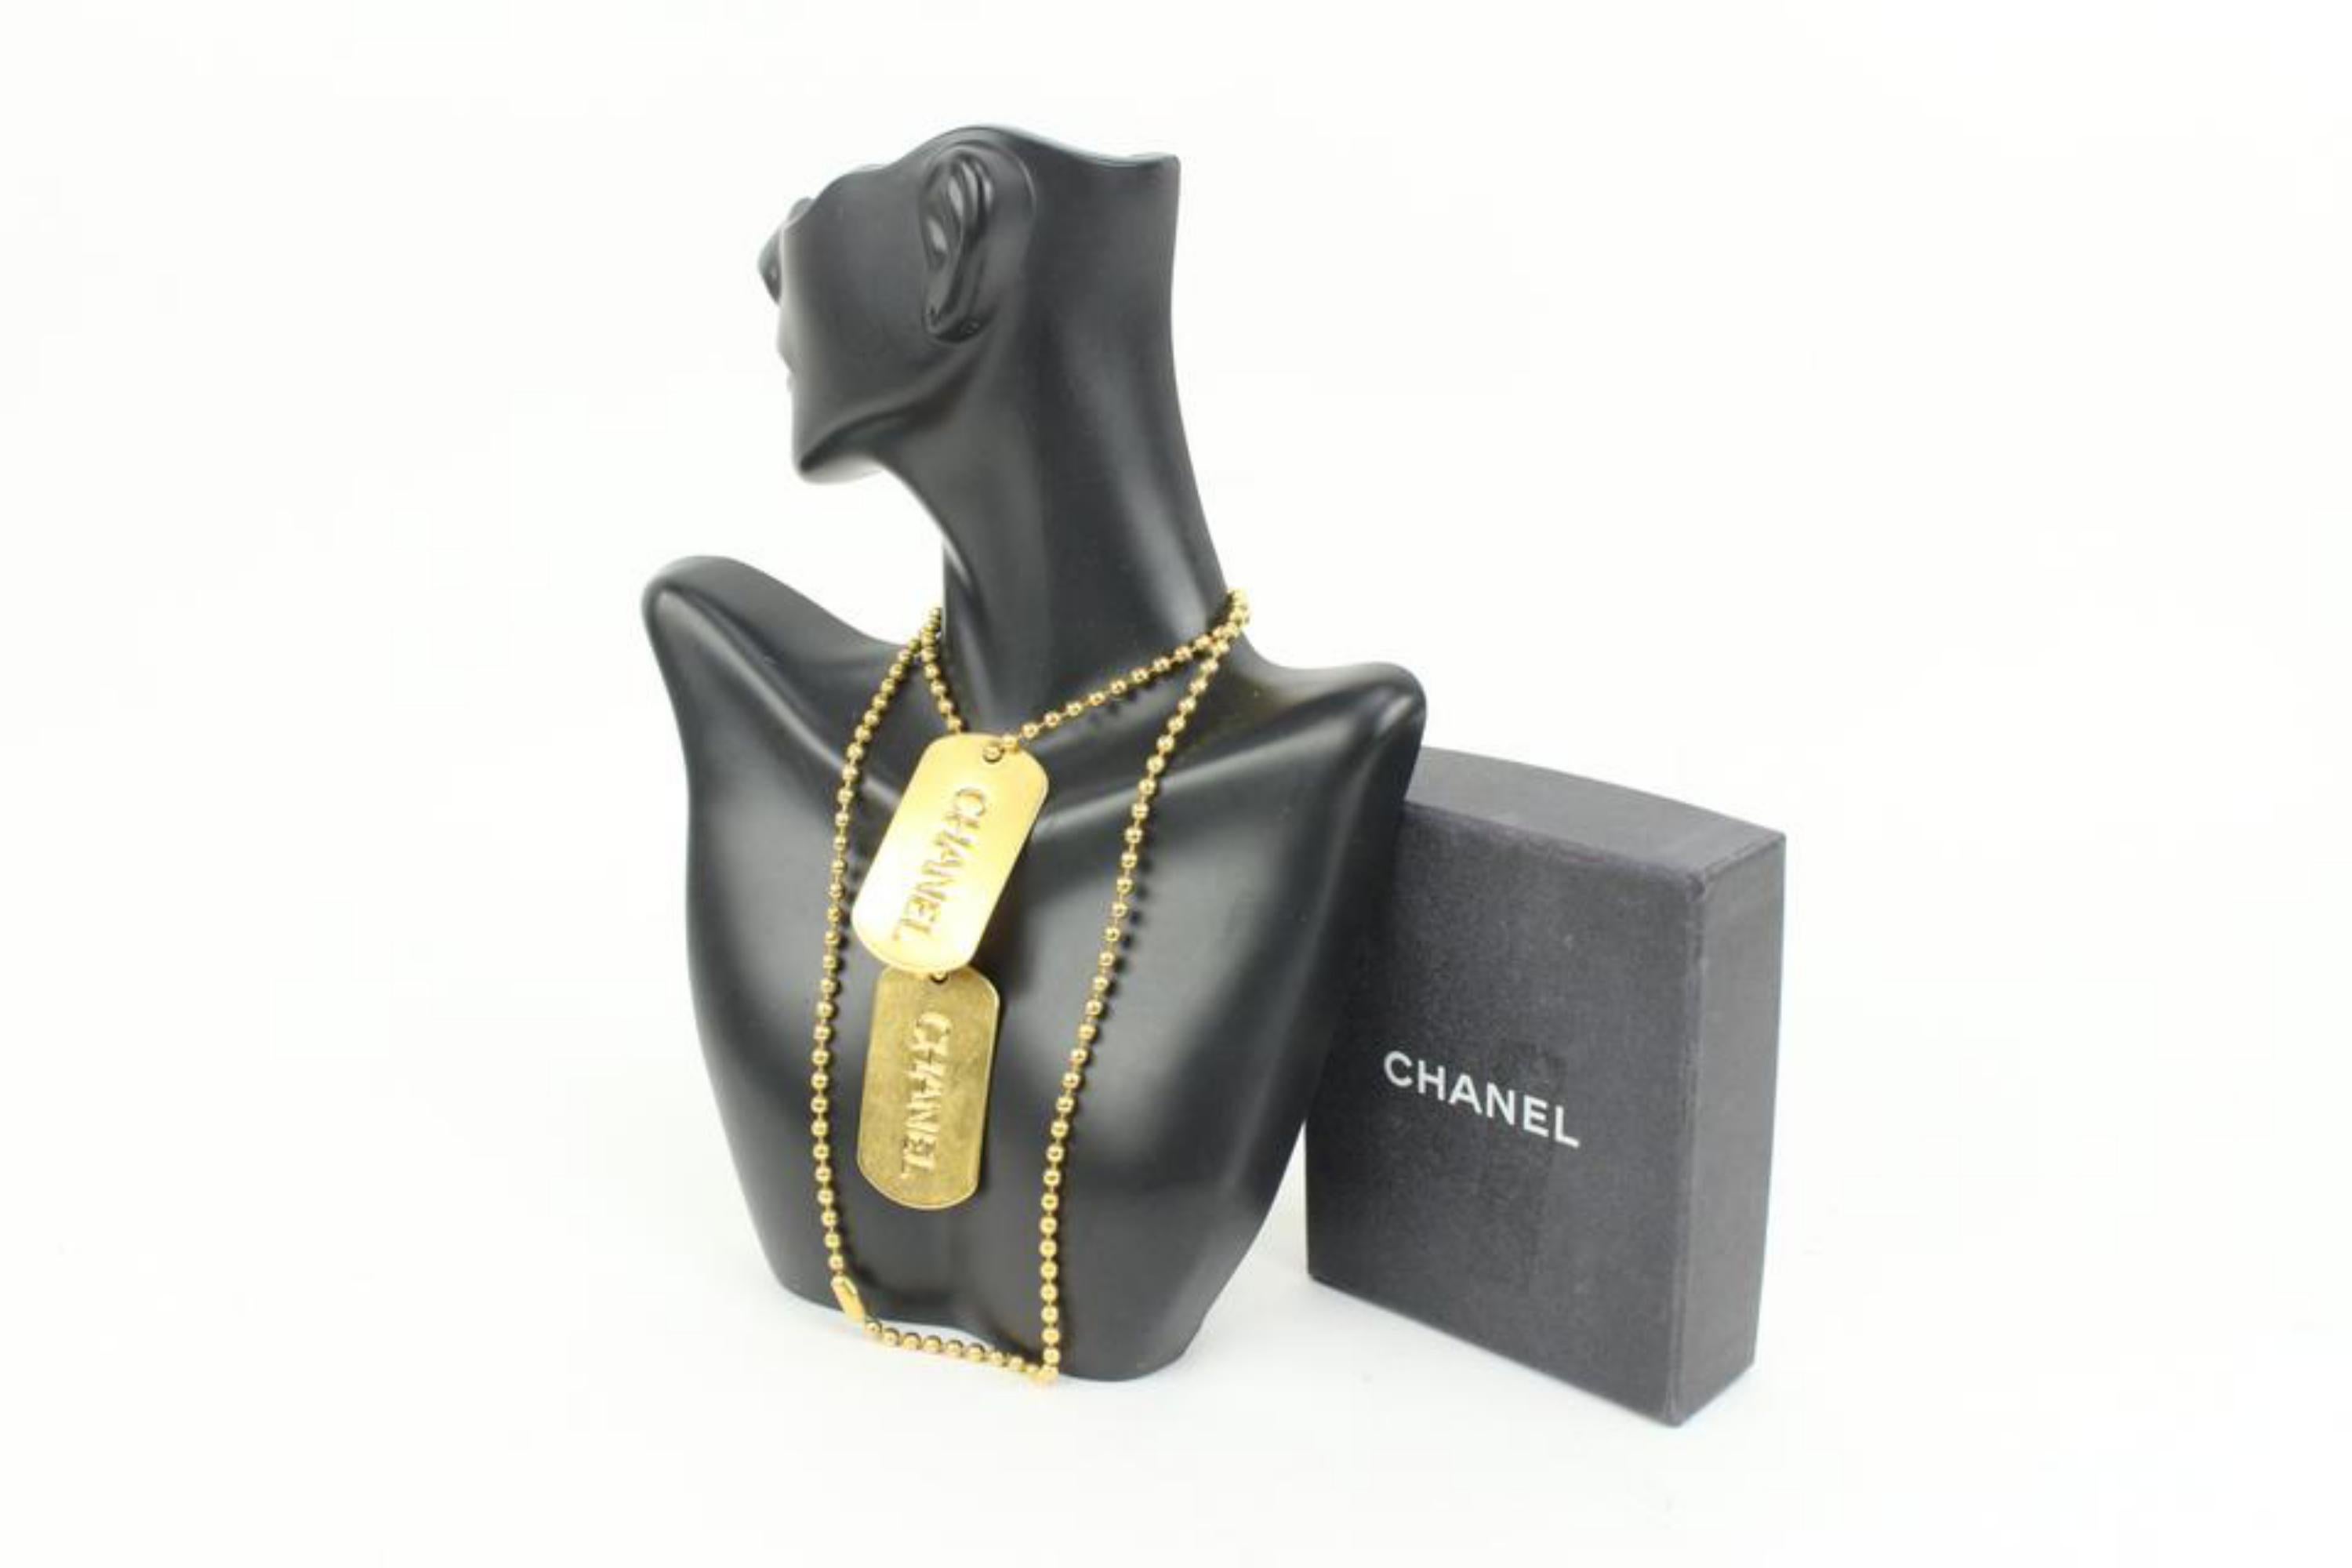 Chanel Ultra Rare 93a CC Logo Dog Tags Pendant Necklace 45ck8
Date Code/Serial Number: 93 A
Made In: France
Measurements: Length:  25.5